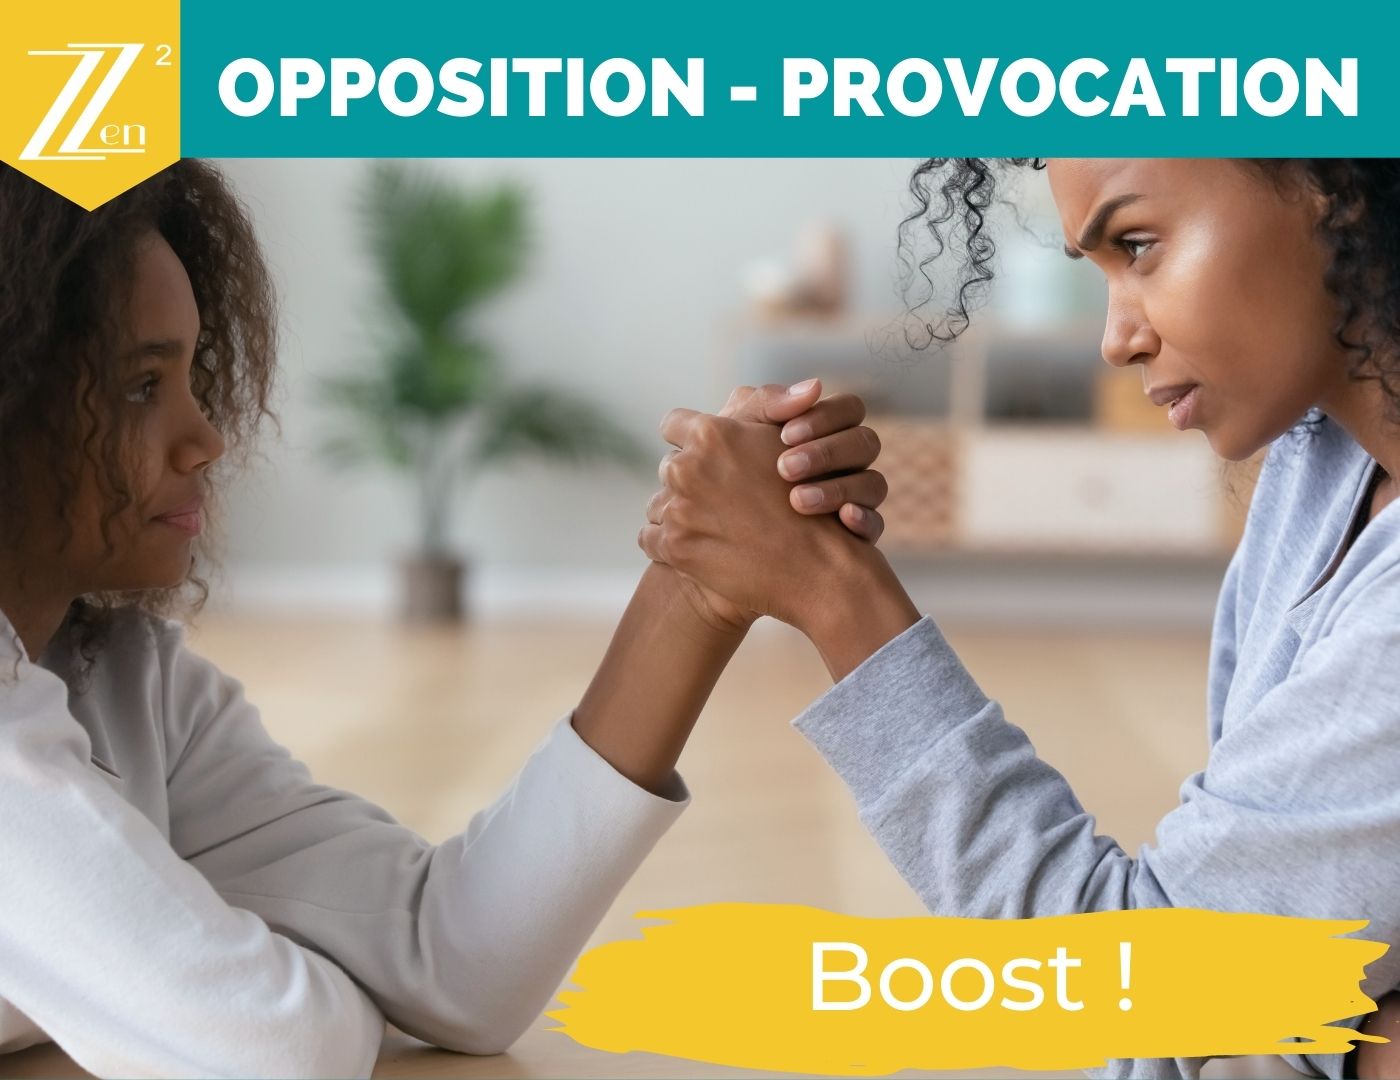 formation-opposition-provocation